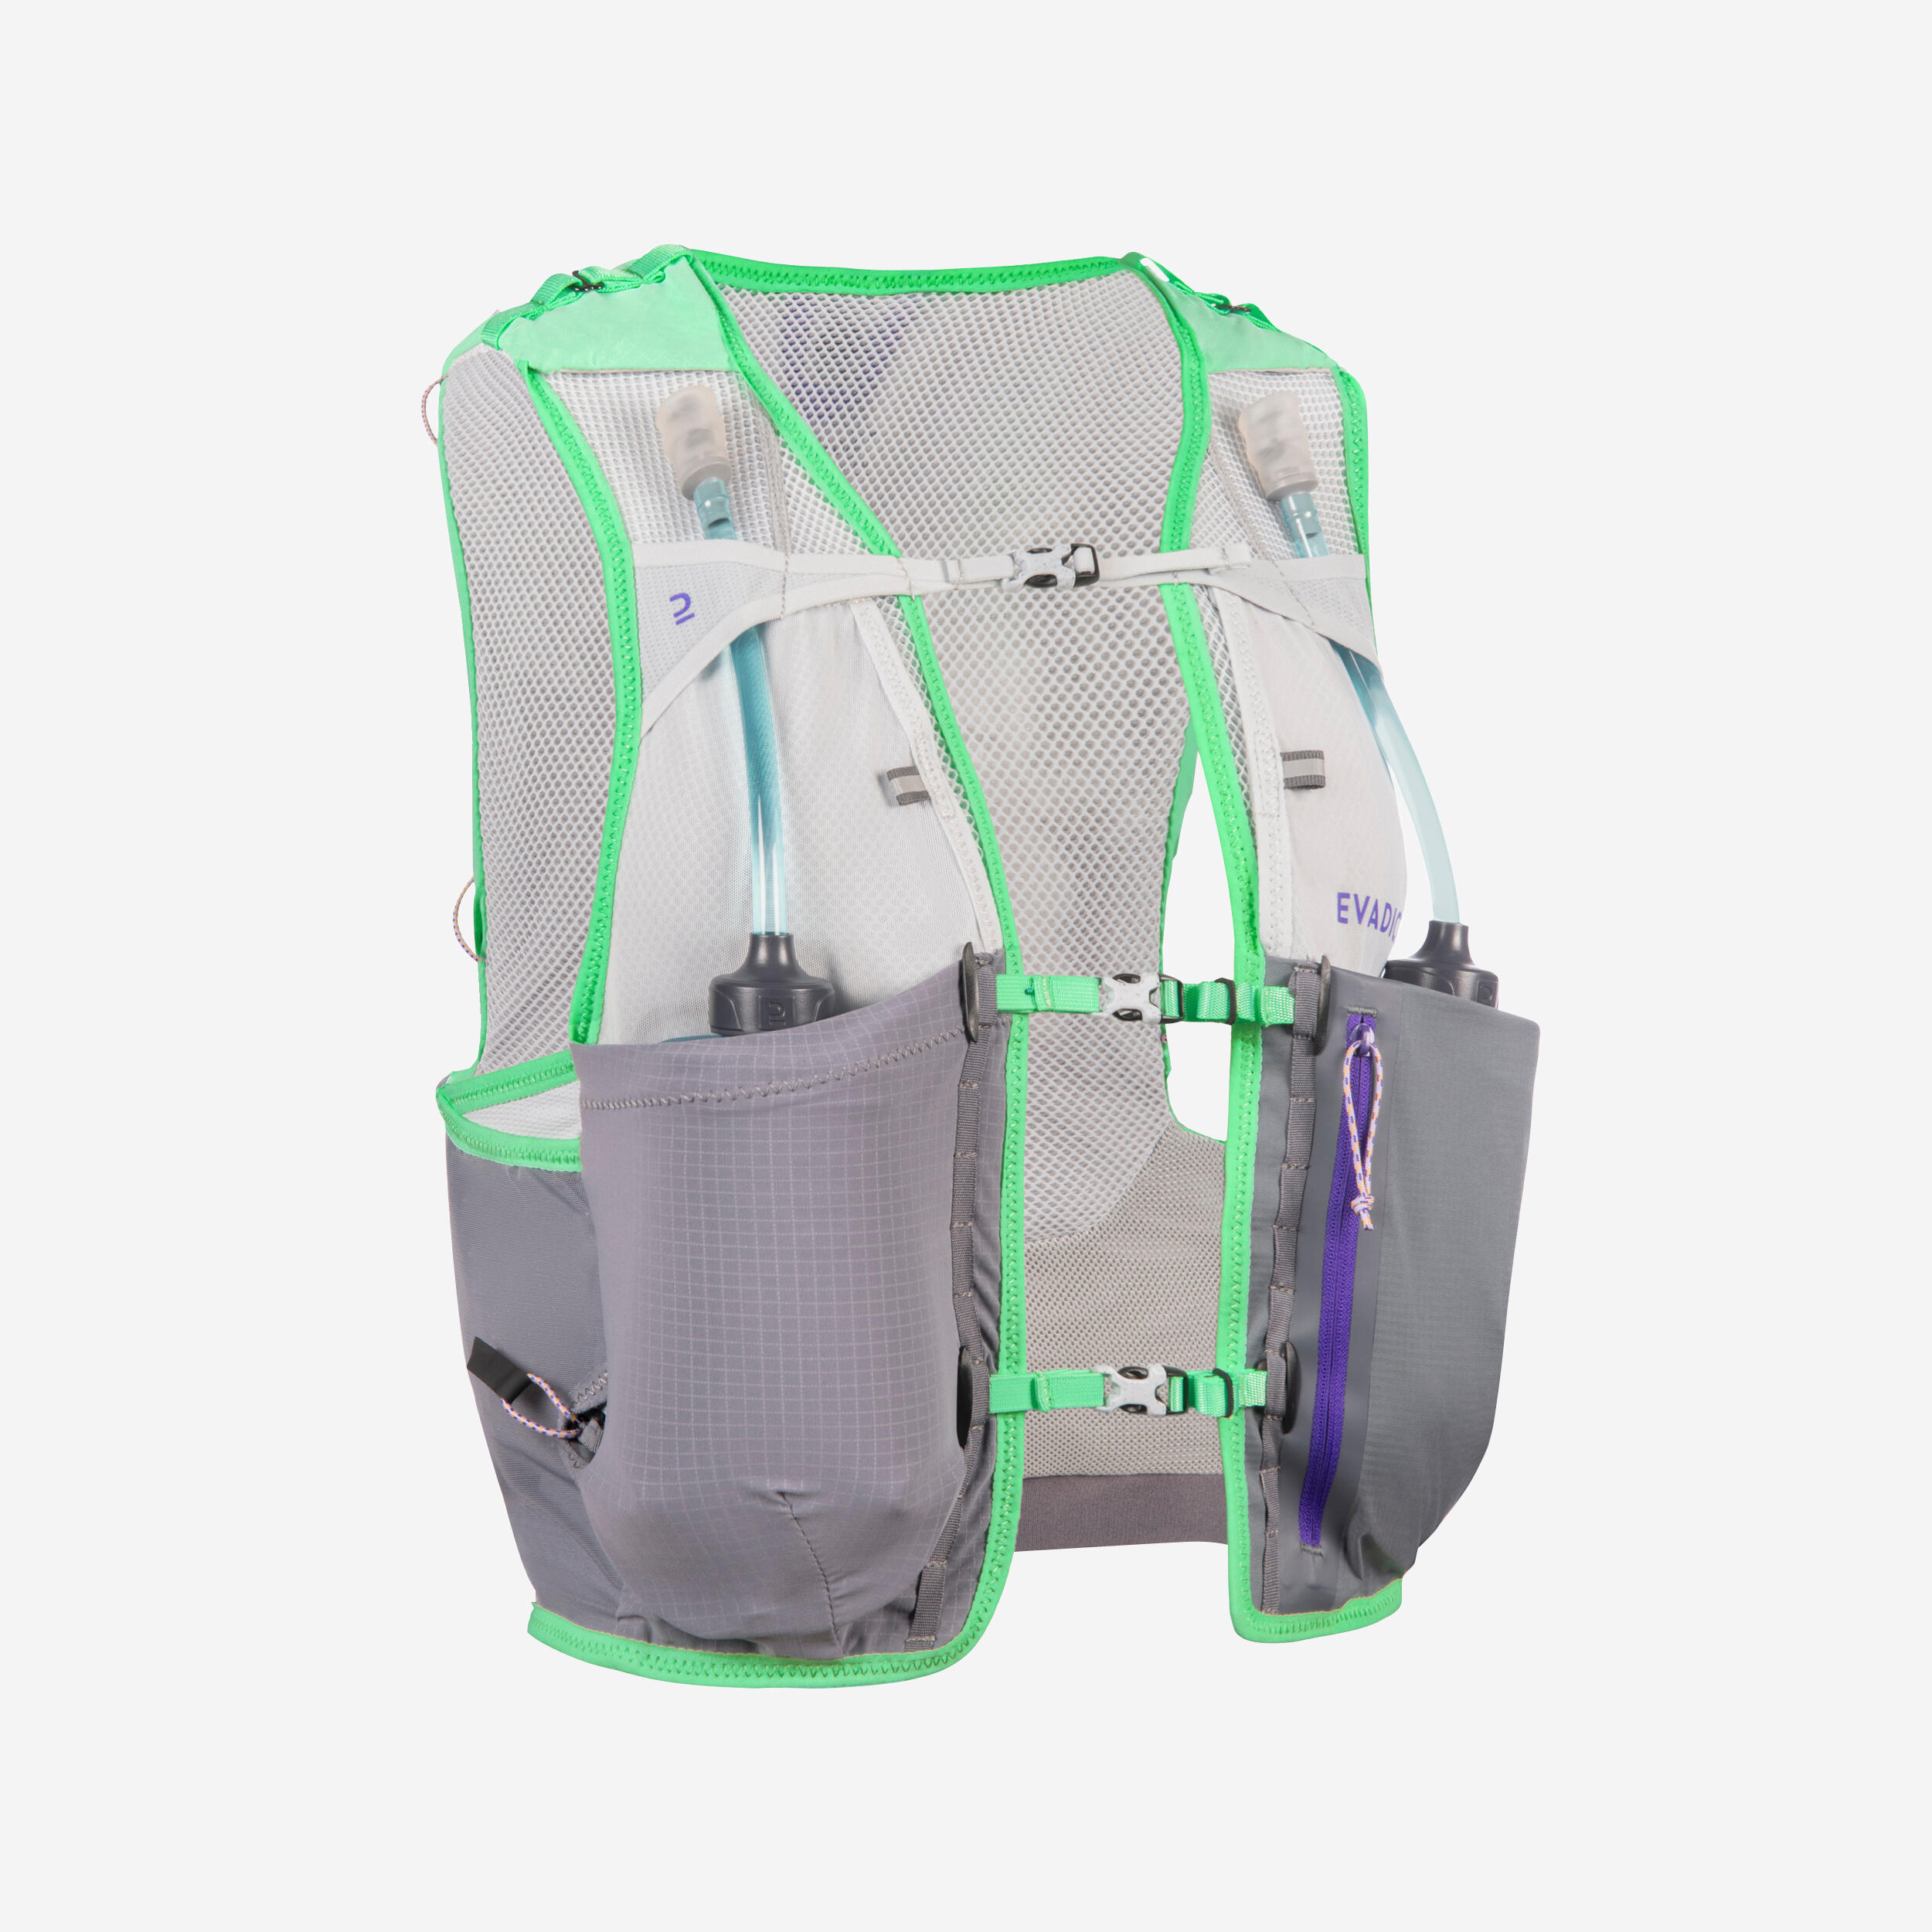 8L WOMEN'S TRAIL RUNNING BAG - MINT GREEN - SOLD WITH 2 500ML FLASKS 1/9